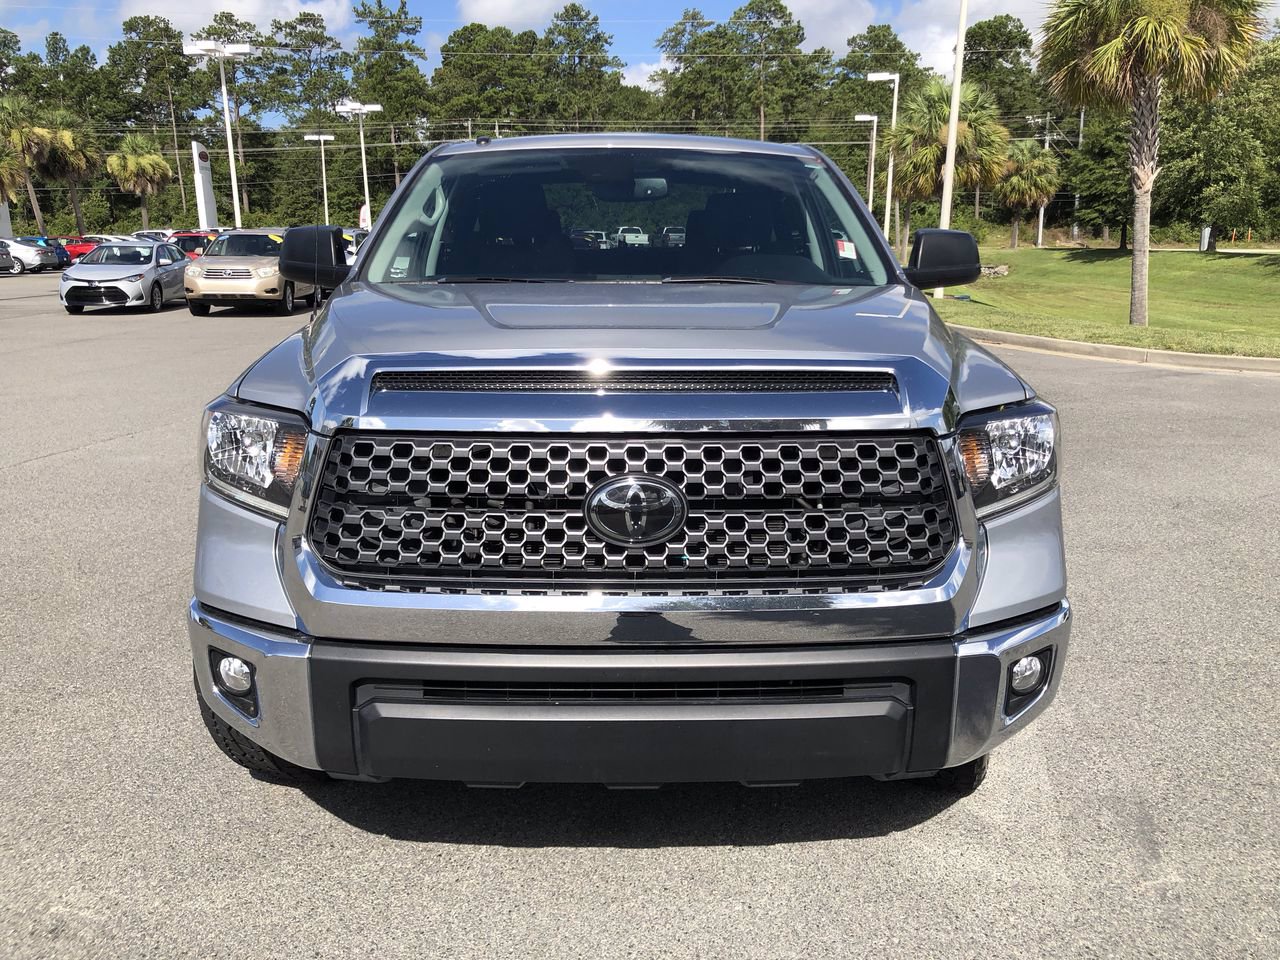 Certified Pre-Owned 2018 Toyota Tundra 2WD SR5 Crewmax